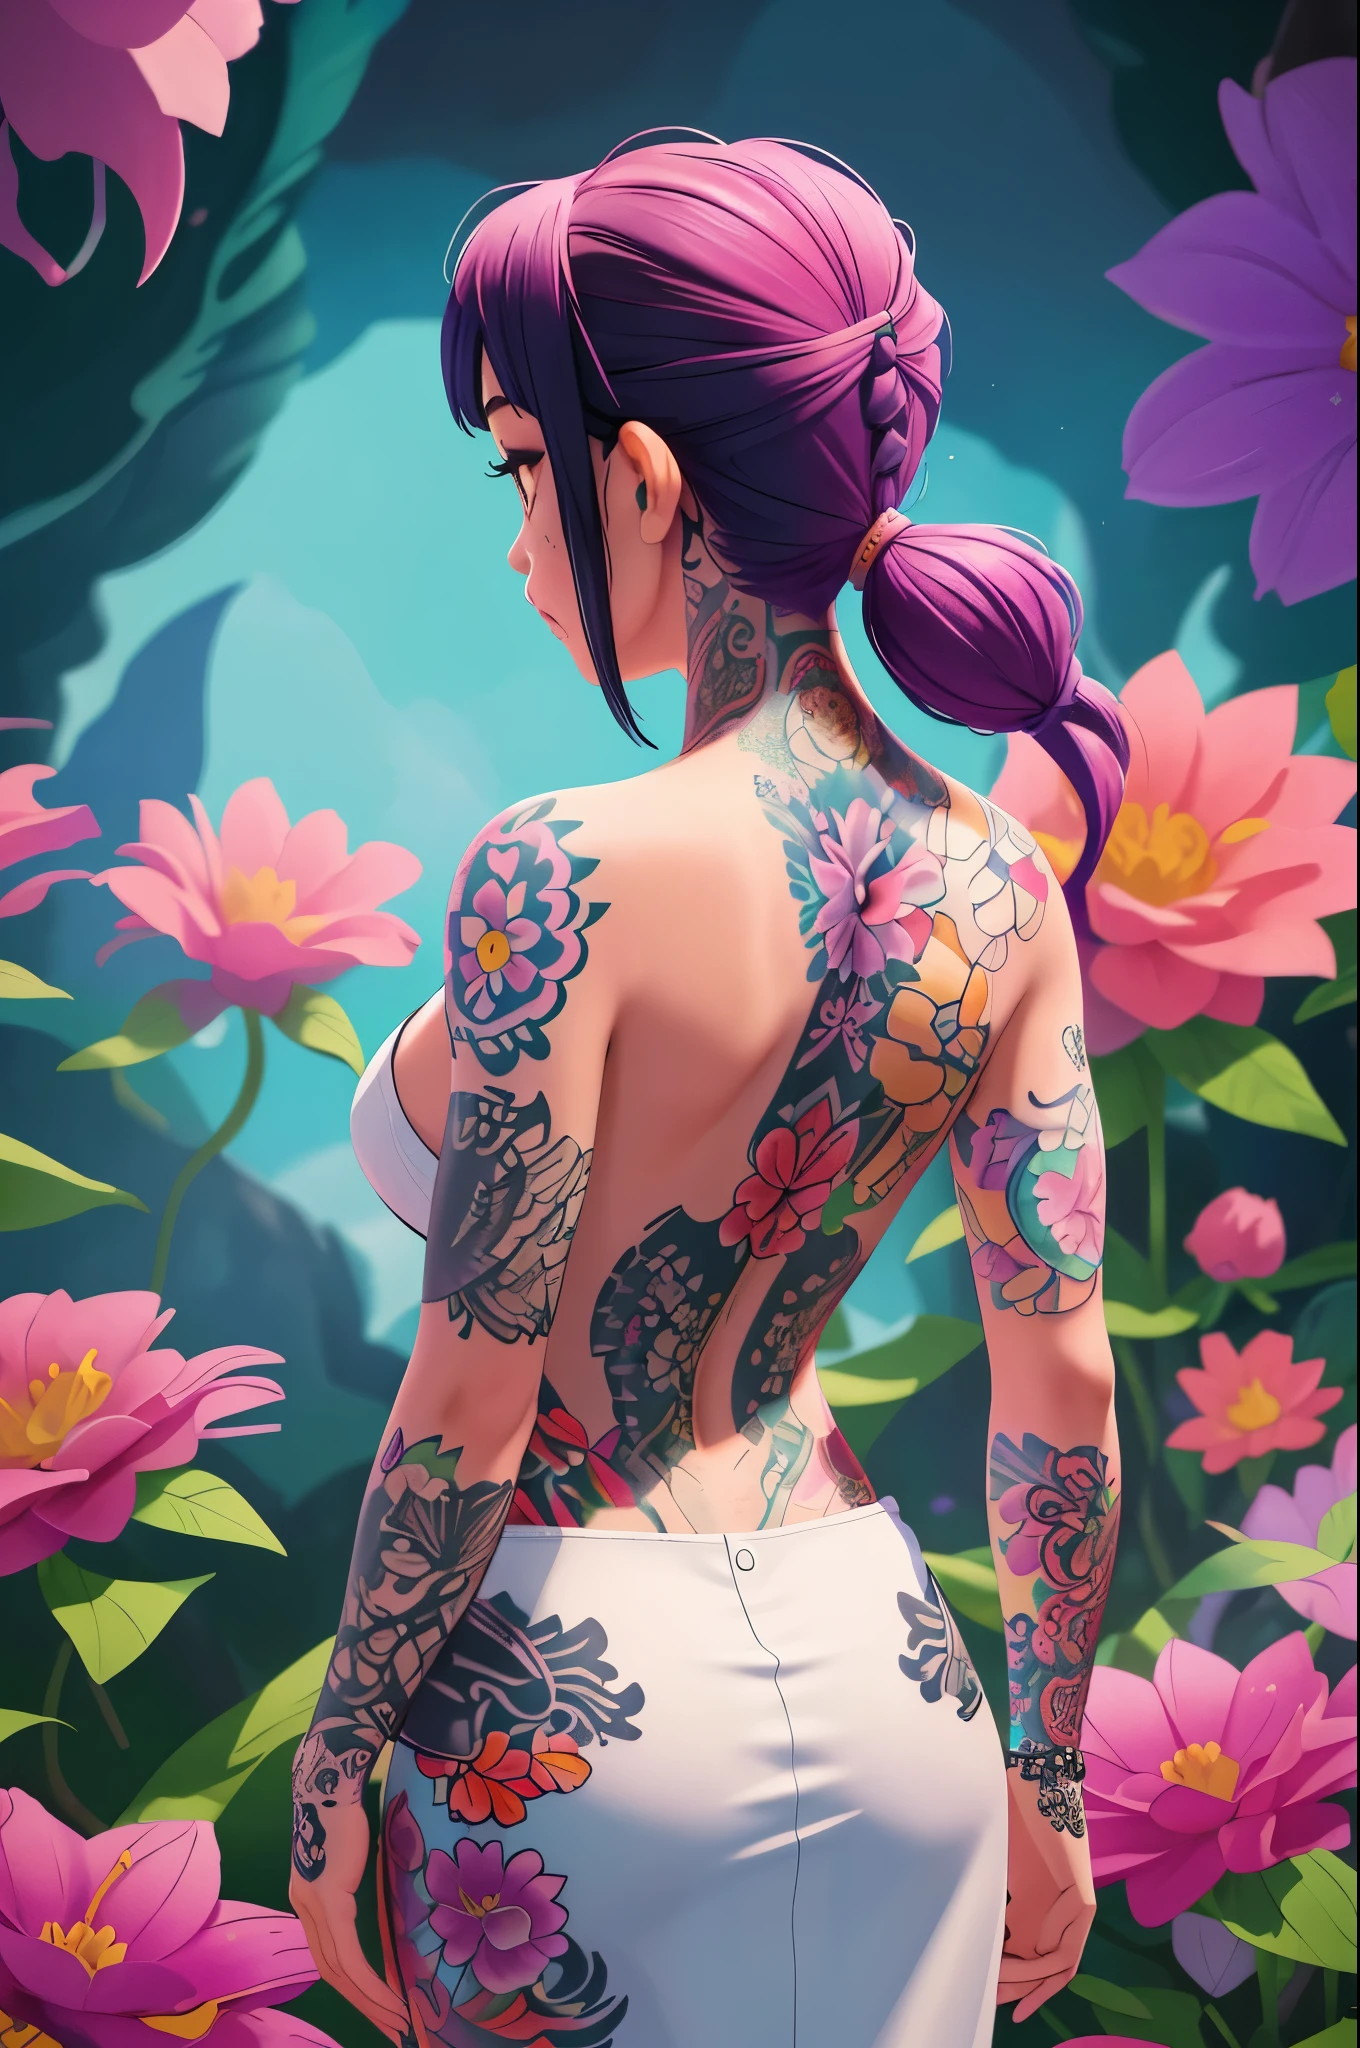 tattooedgirl, Sea of flowers around, 1 big flower symmetrical tattoo on a girl's back, (back view of girl), hyper-realistic, detailed, vibrant colors, dynamic lighting, cinematic composition, 8k resolution, atmospheric, ethereal